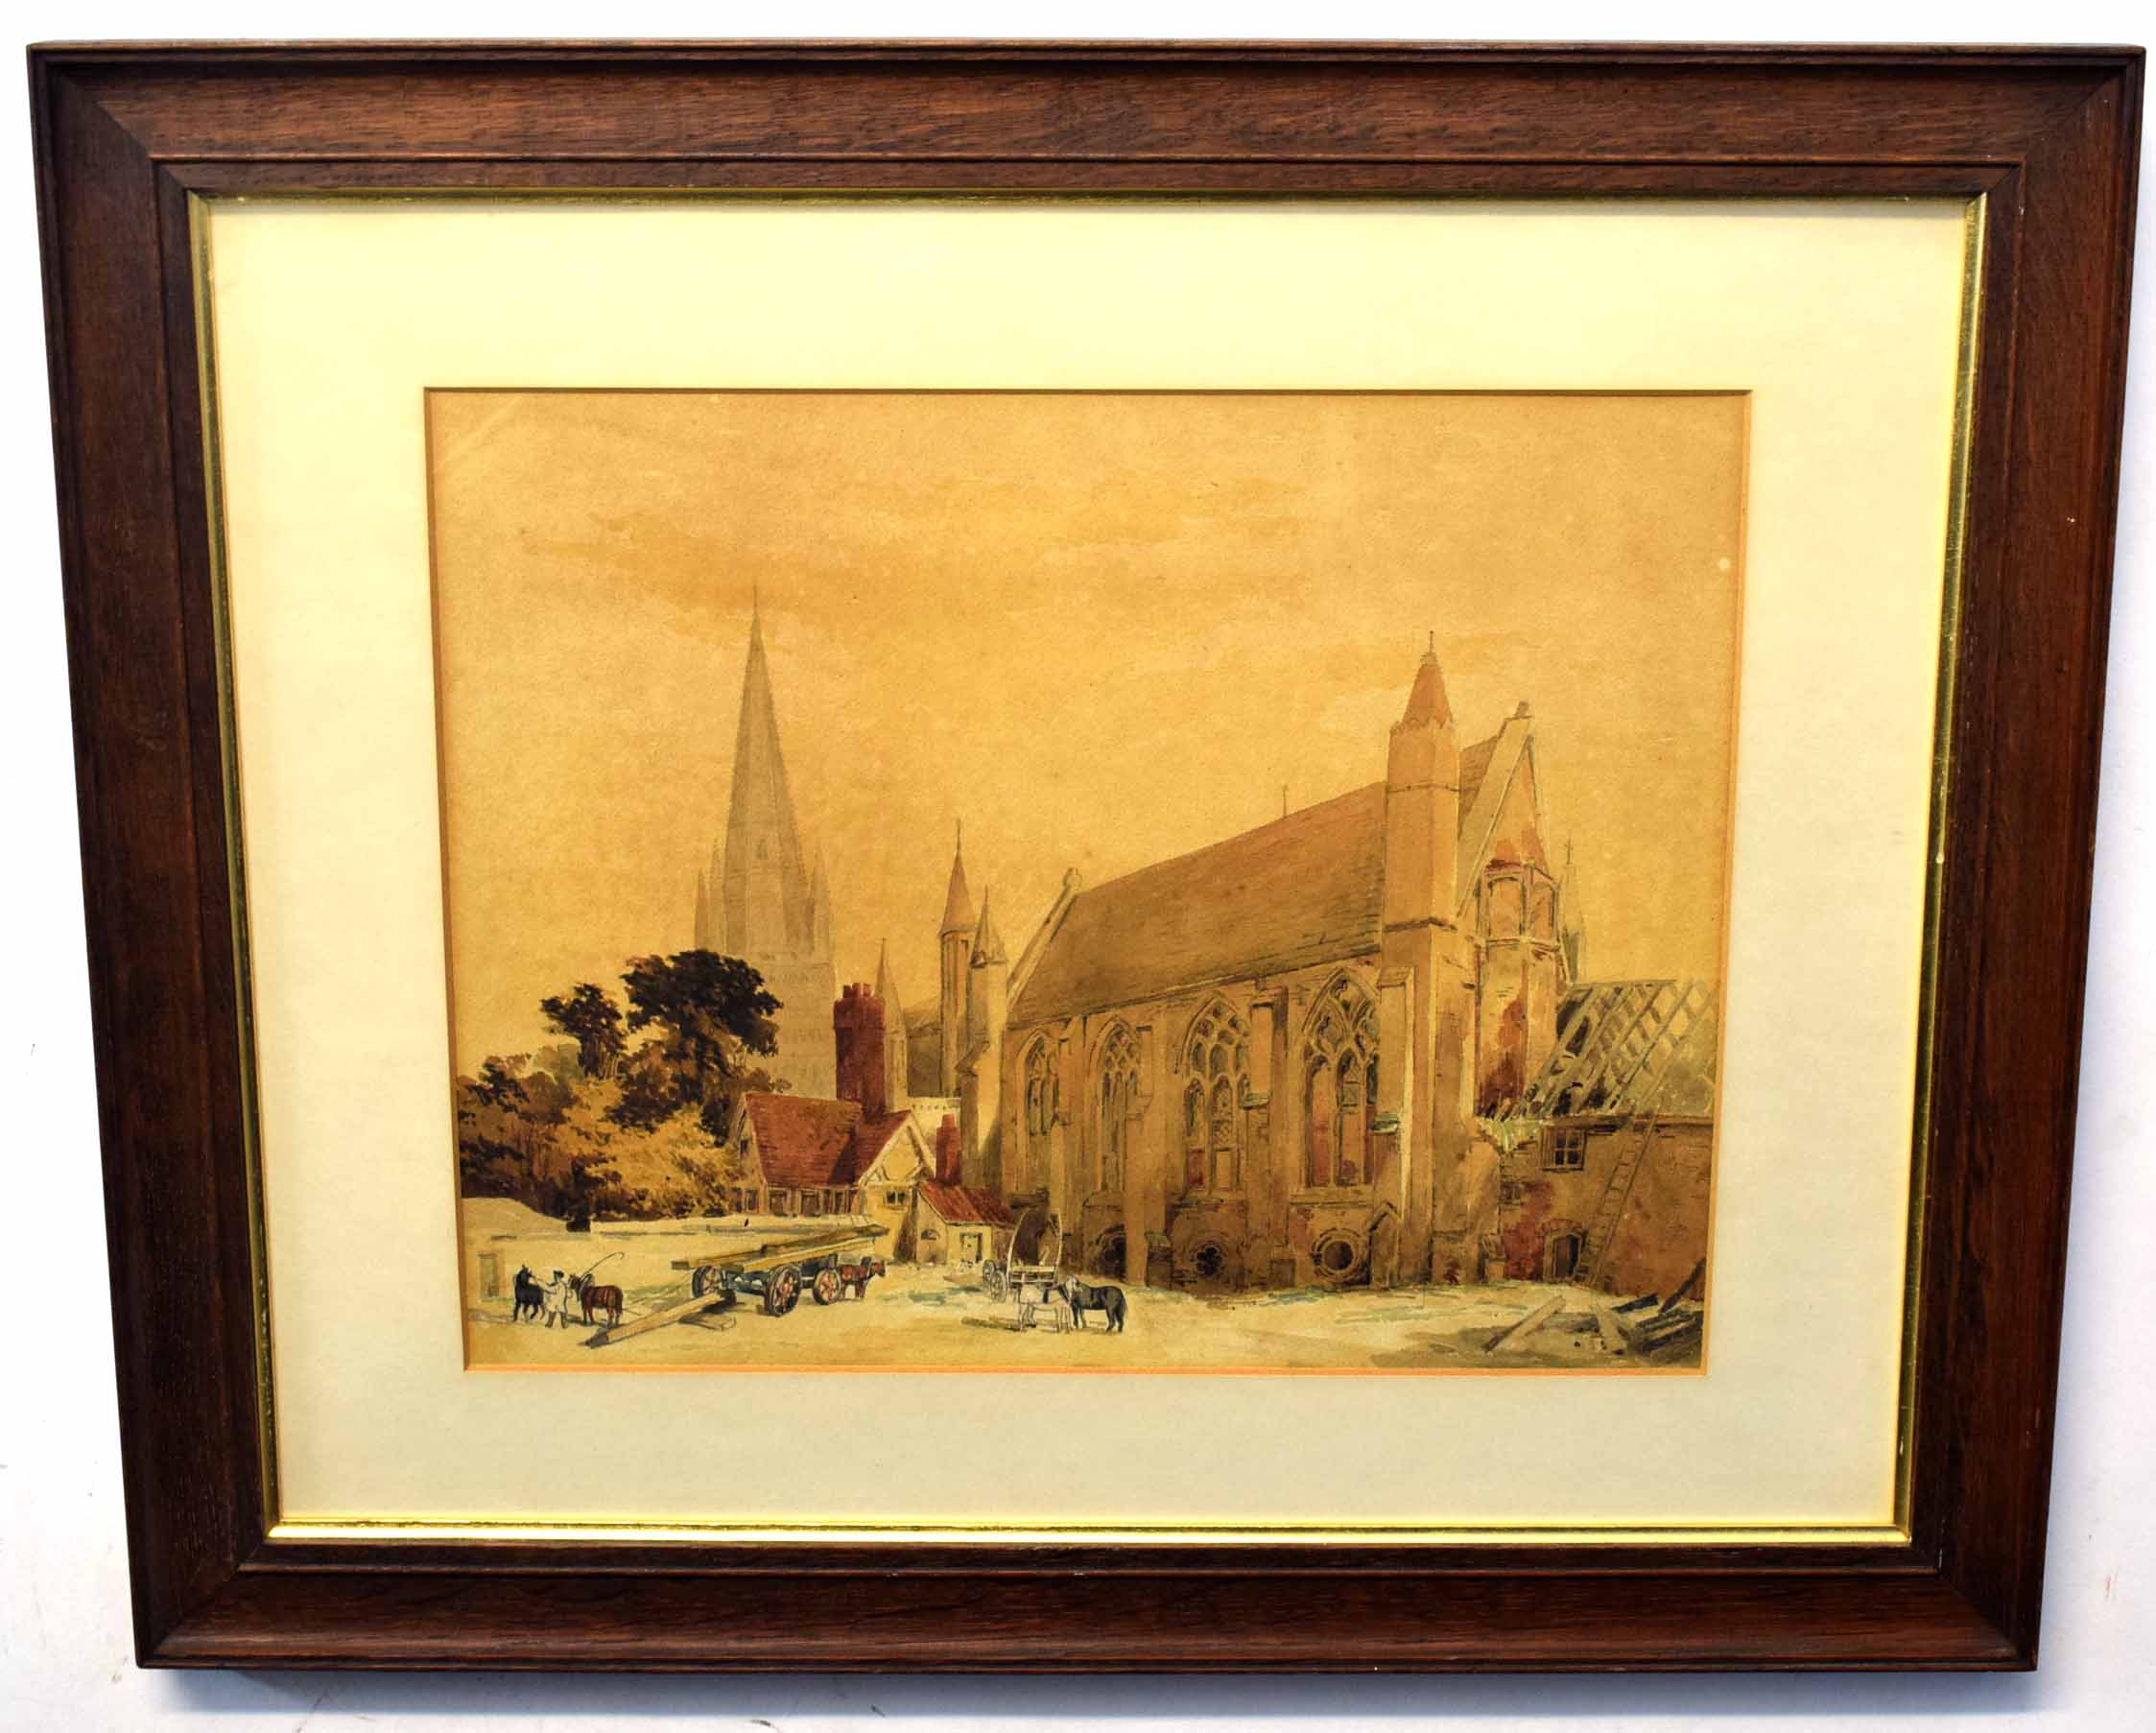 19th century English School watercolour, Figures and horses by a church, 27 x 34cm